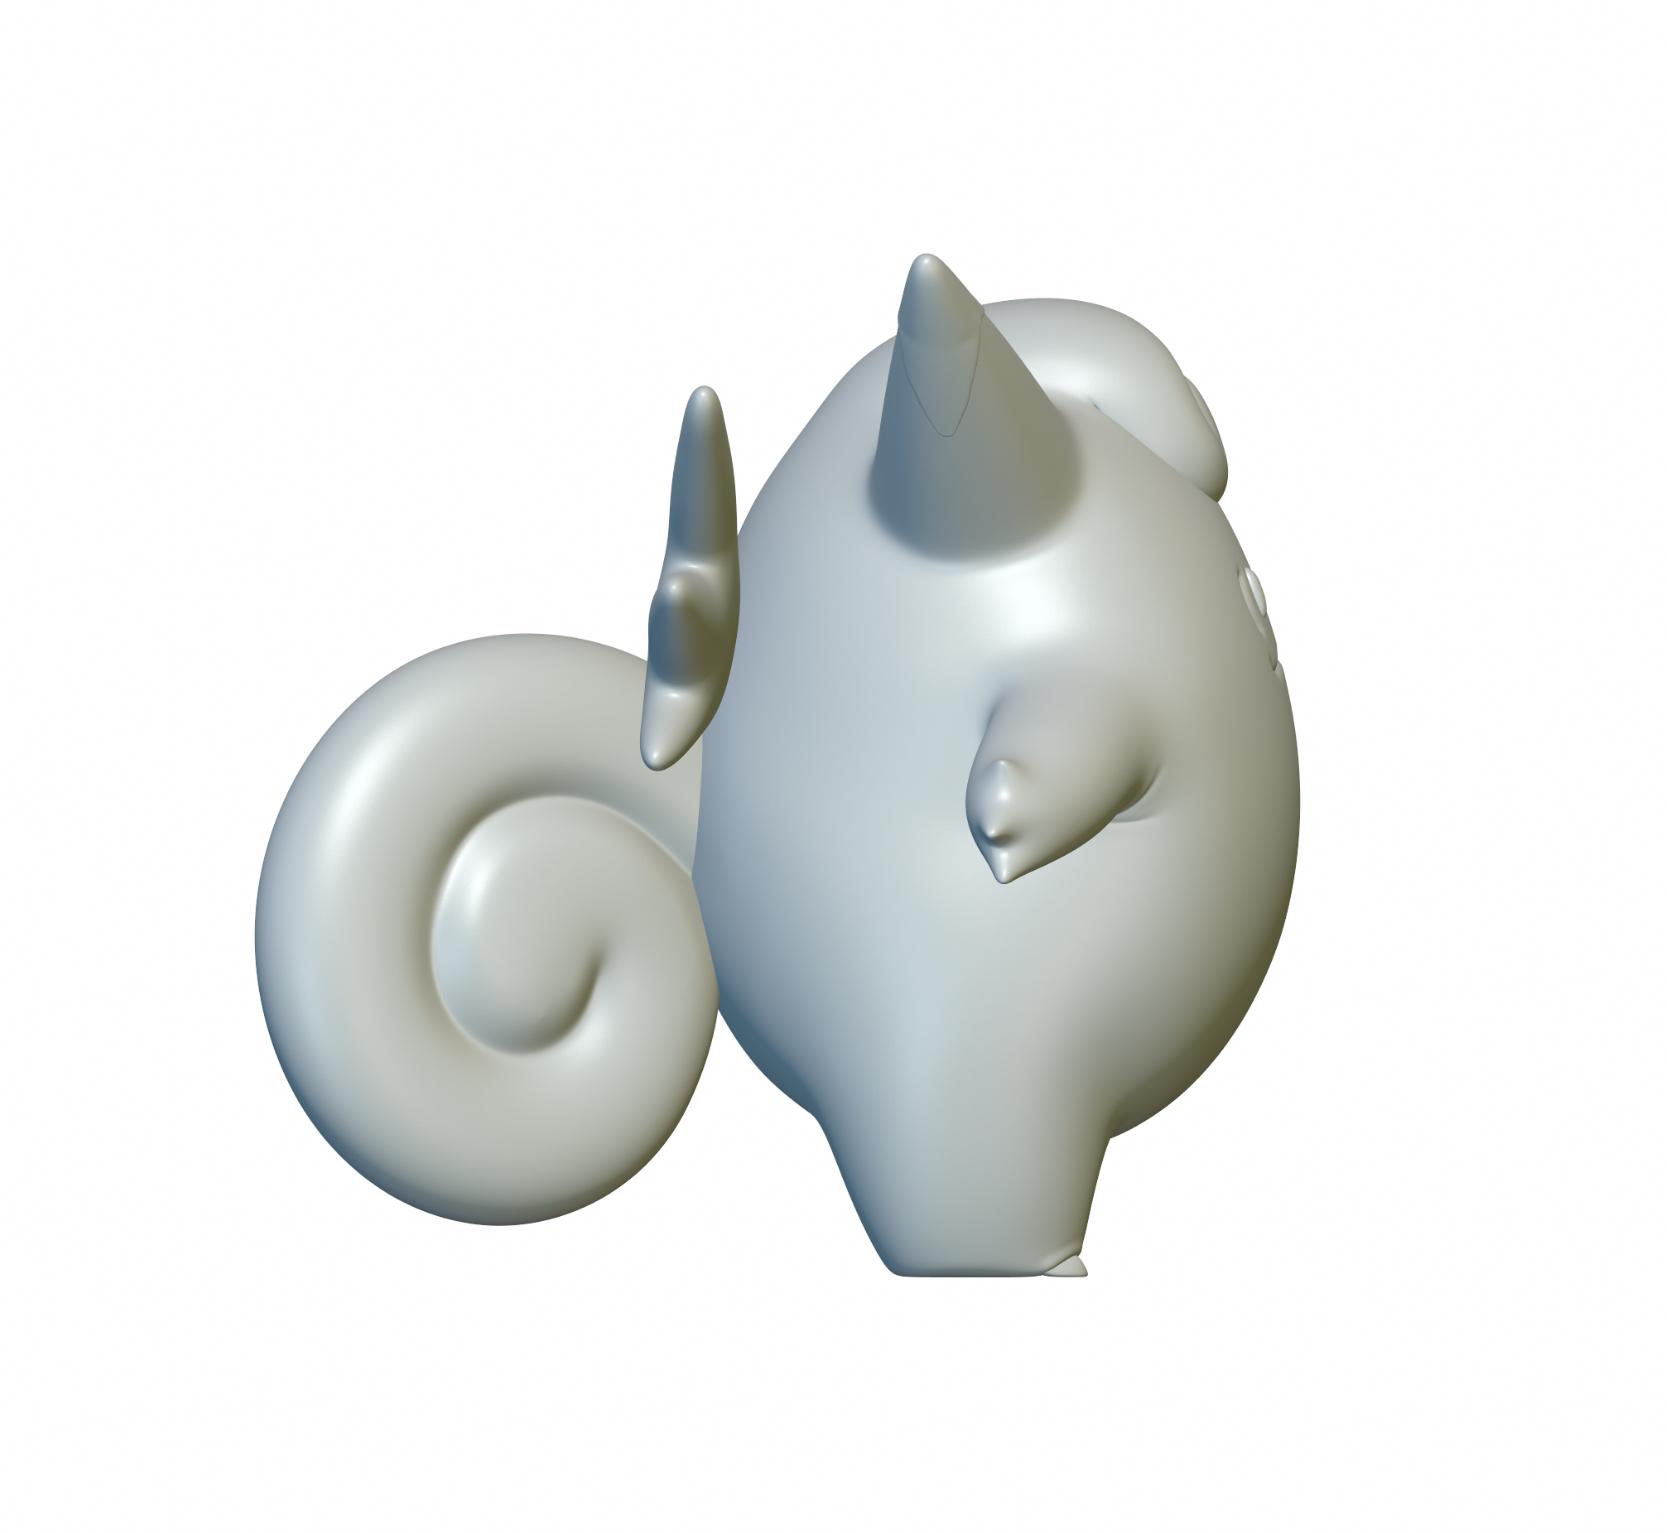 Pokemon Clefable #36 - Optimized for 3D Printing 3d model